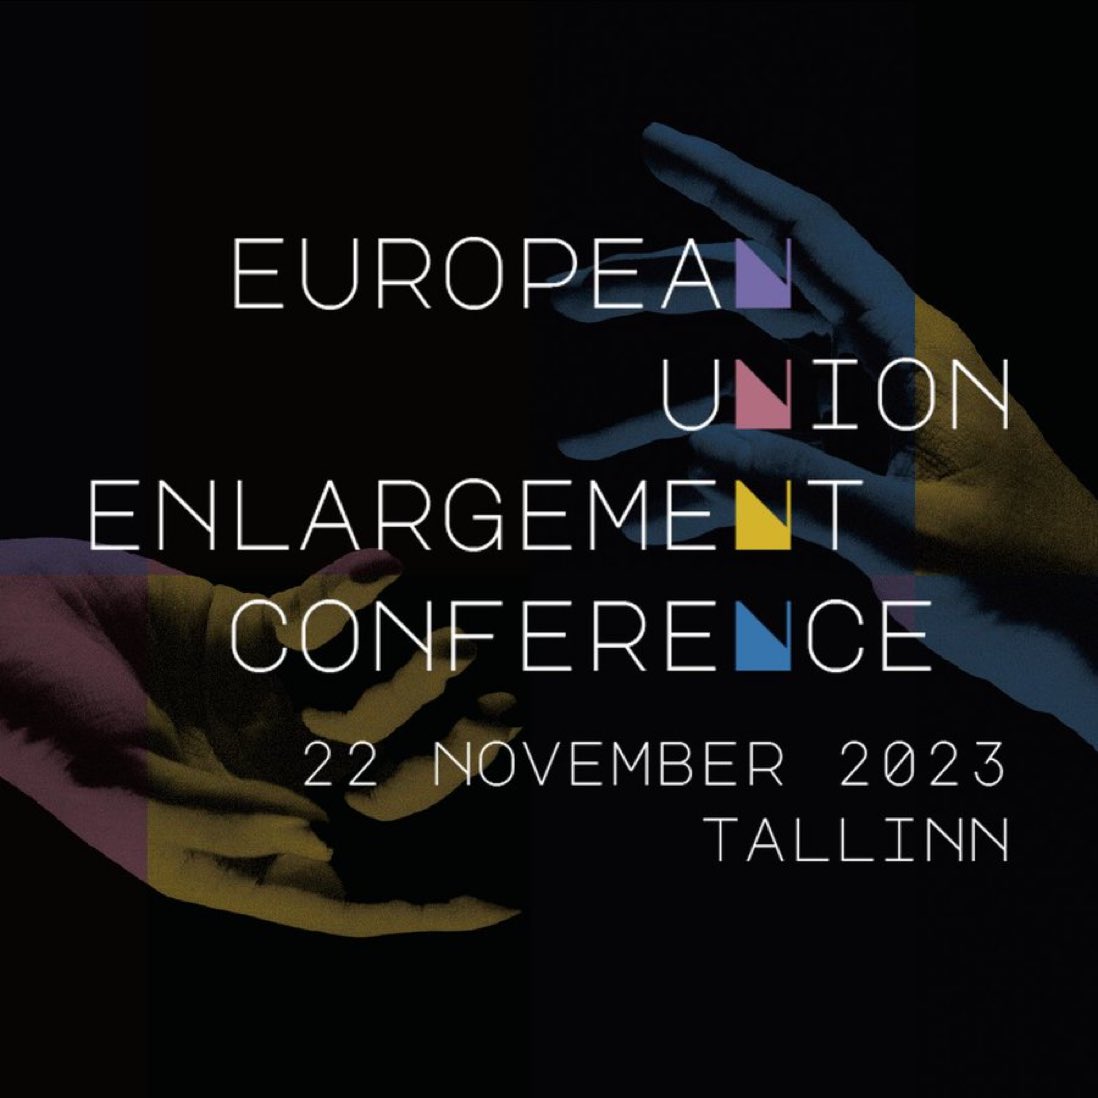 Glad to be in #Tallinn today for very timely “European Union enlargement conference” organized by @MFAestonia and @ICDS_Tallinn. Among others, @Tsahkna @vseviov @jorida_tabaku @IngridTersman @KristiRaik @StelaLeuca @vivloonela to discuss perspectives ahead 🇪🇺🇺🇦🇲🇩#EUECTallinn2023